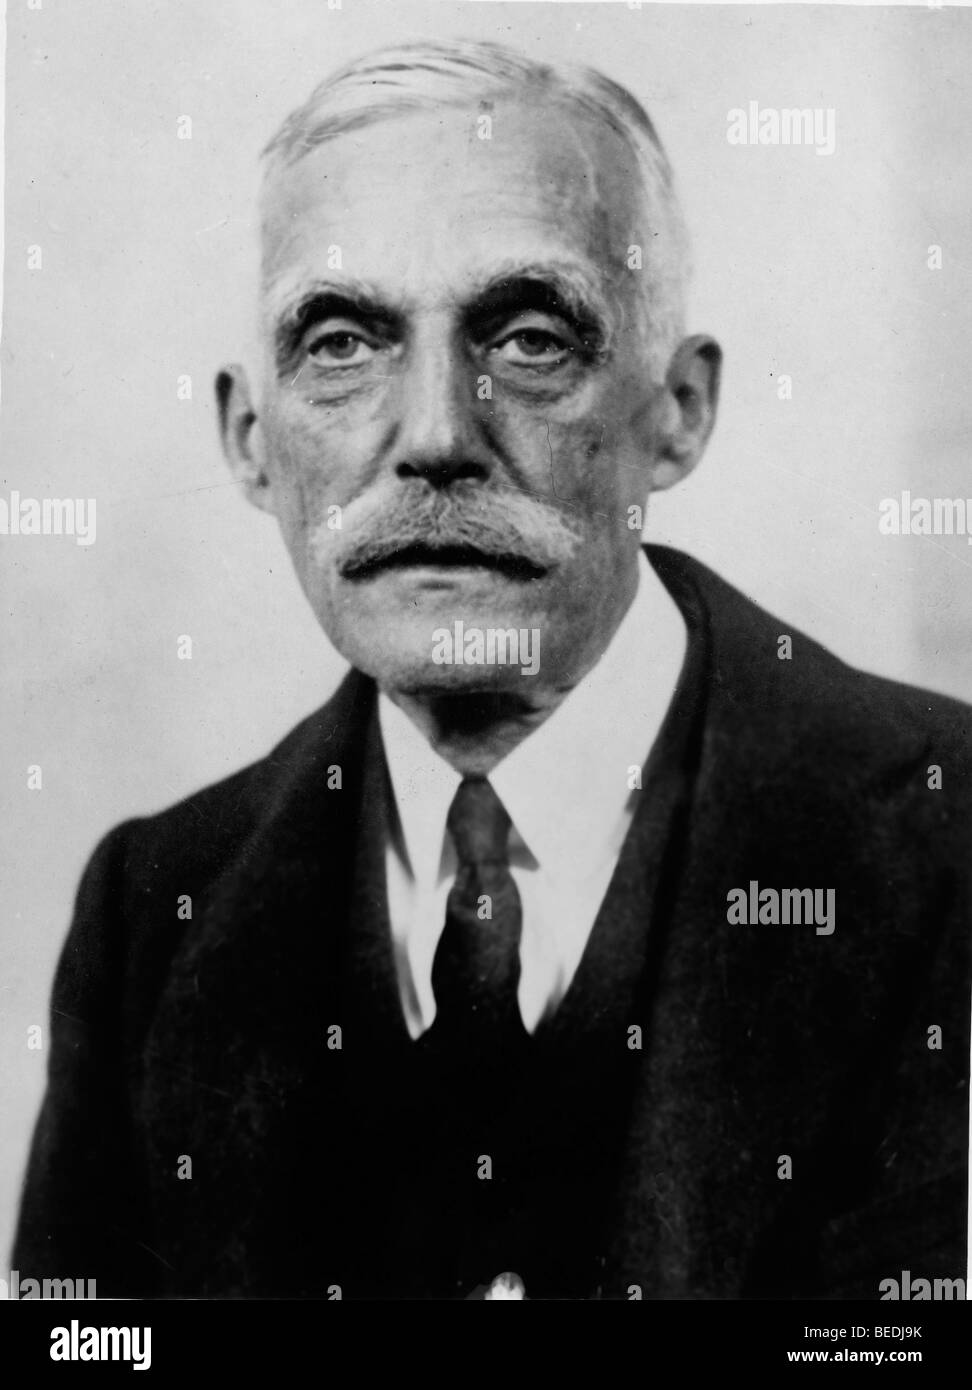 Apr 15, 1936; New York, NY, USA; The American millionaire Andrew Mellon ANDREW W. MELLON was nominated by President Harding to Stock Photo